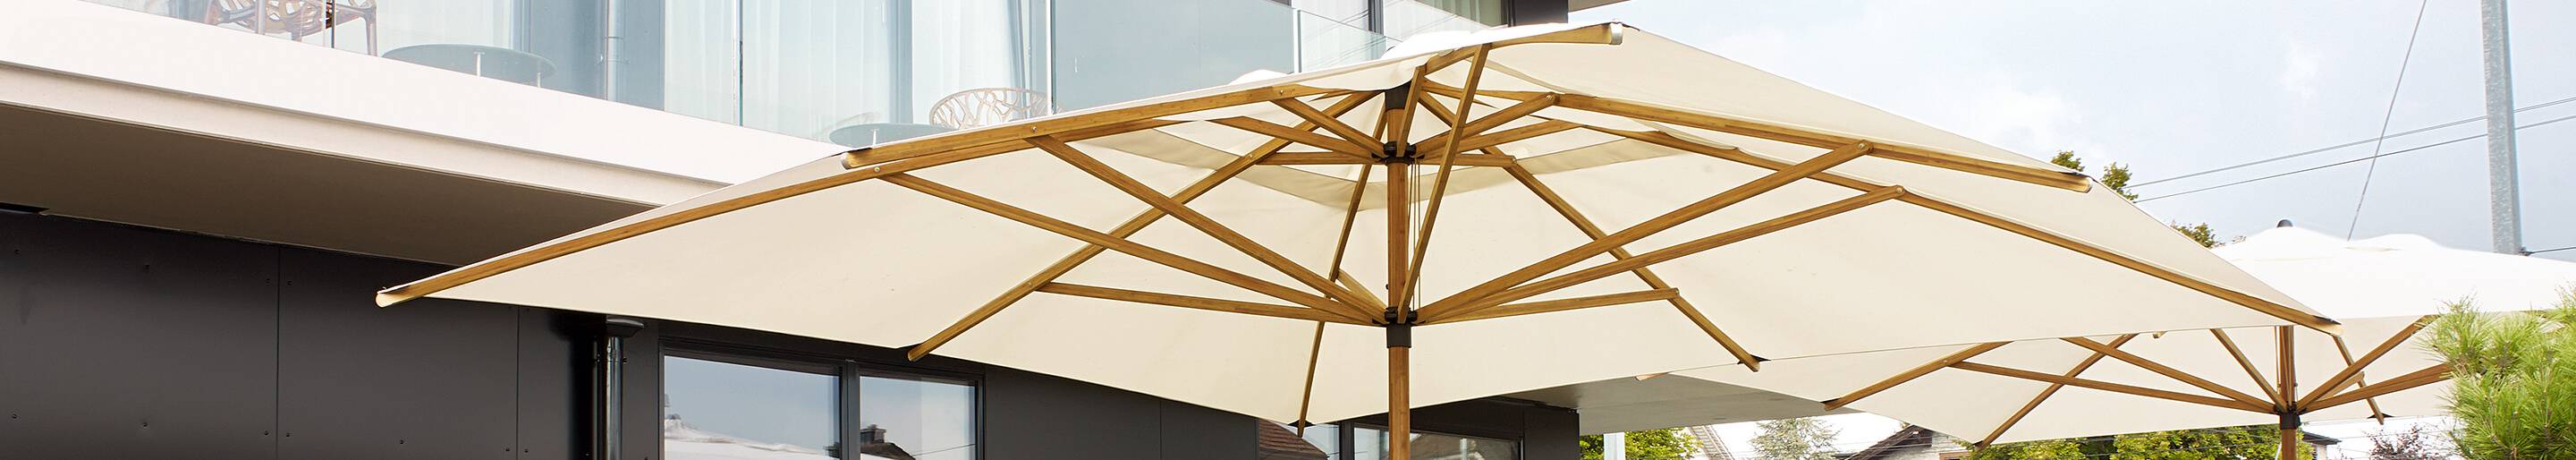 Outdoor Sun shades for your restaurant or hotel